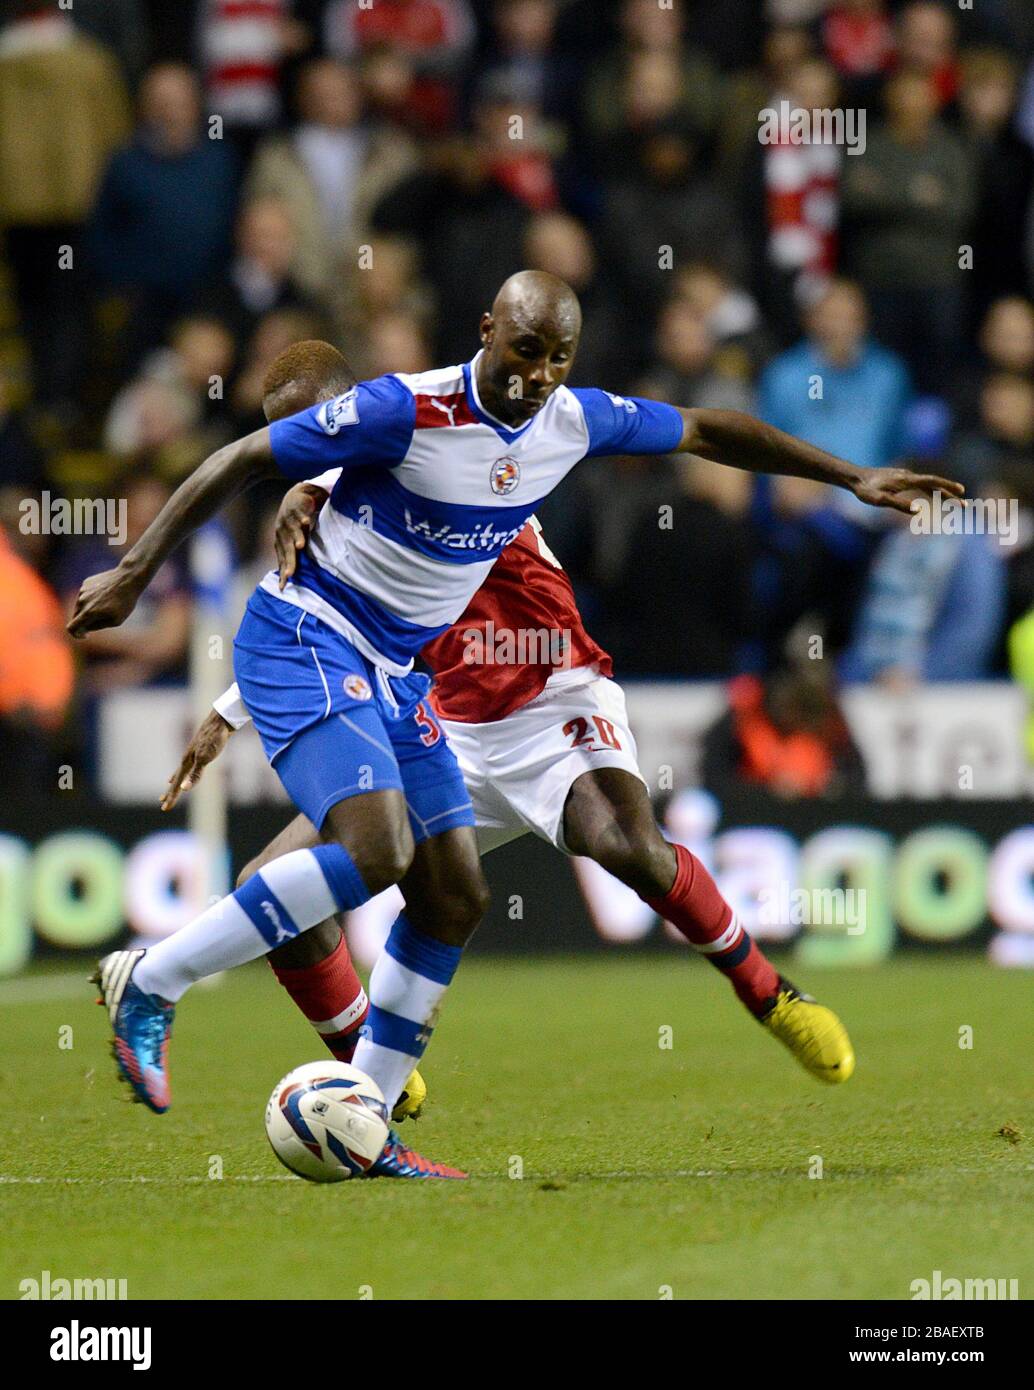 Arsenal's Johan Djourou (rear) and Reading's Jason Roberts (front) battle for the ball Stock Photo